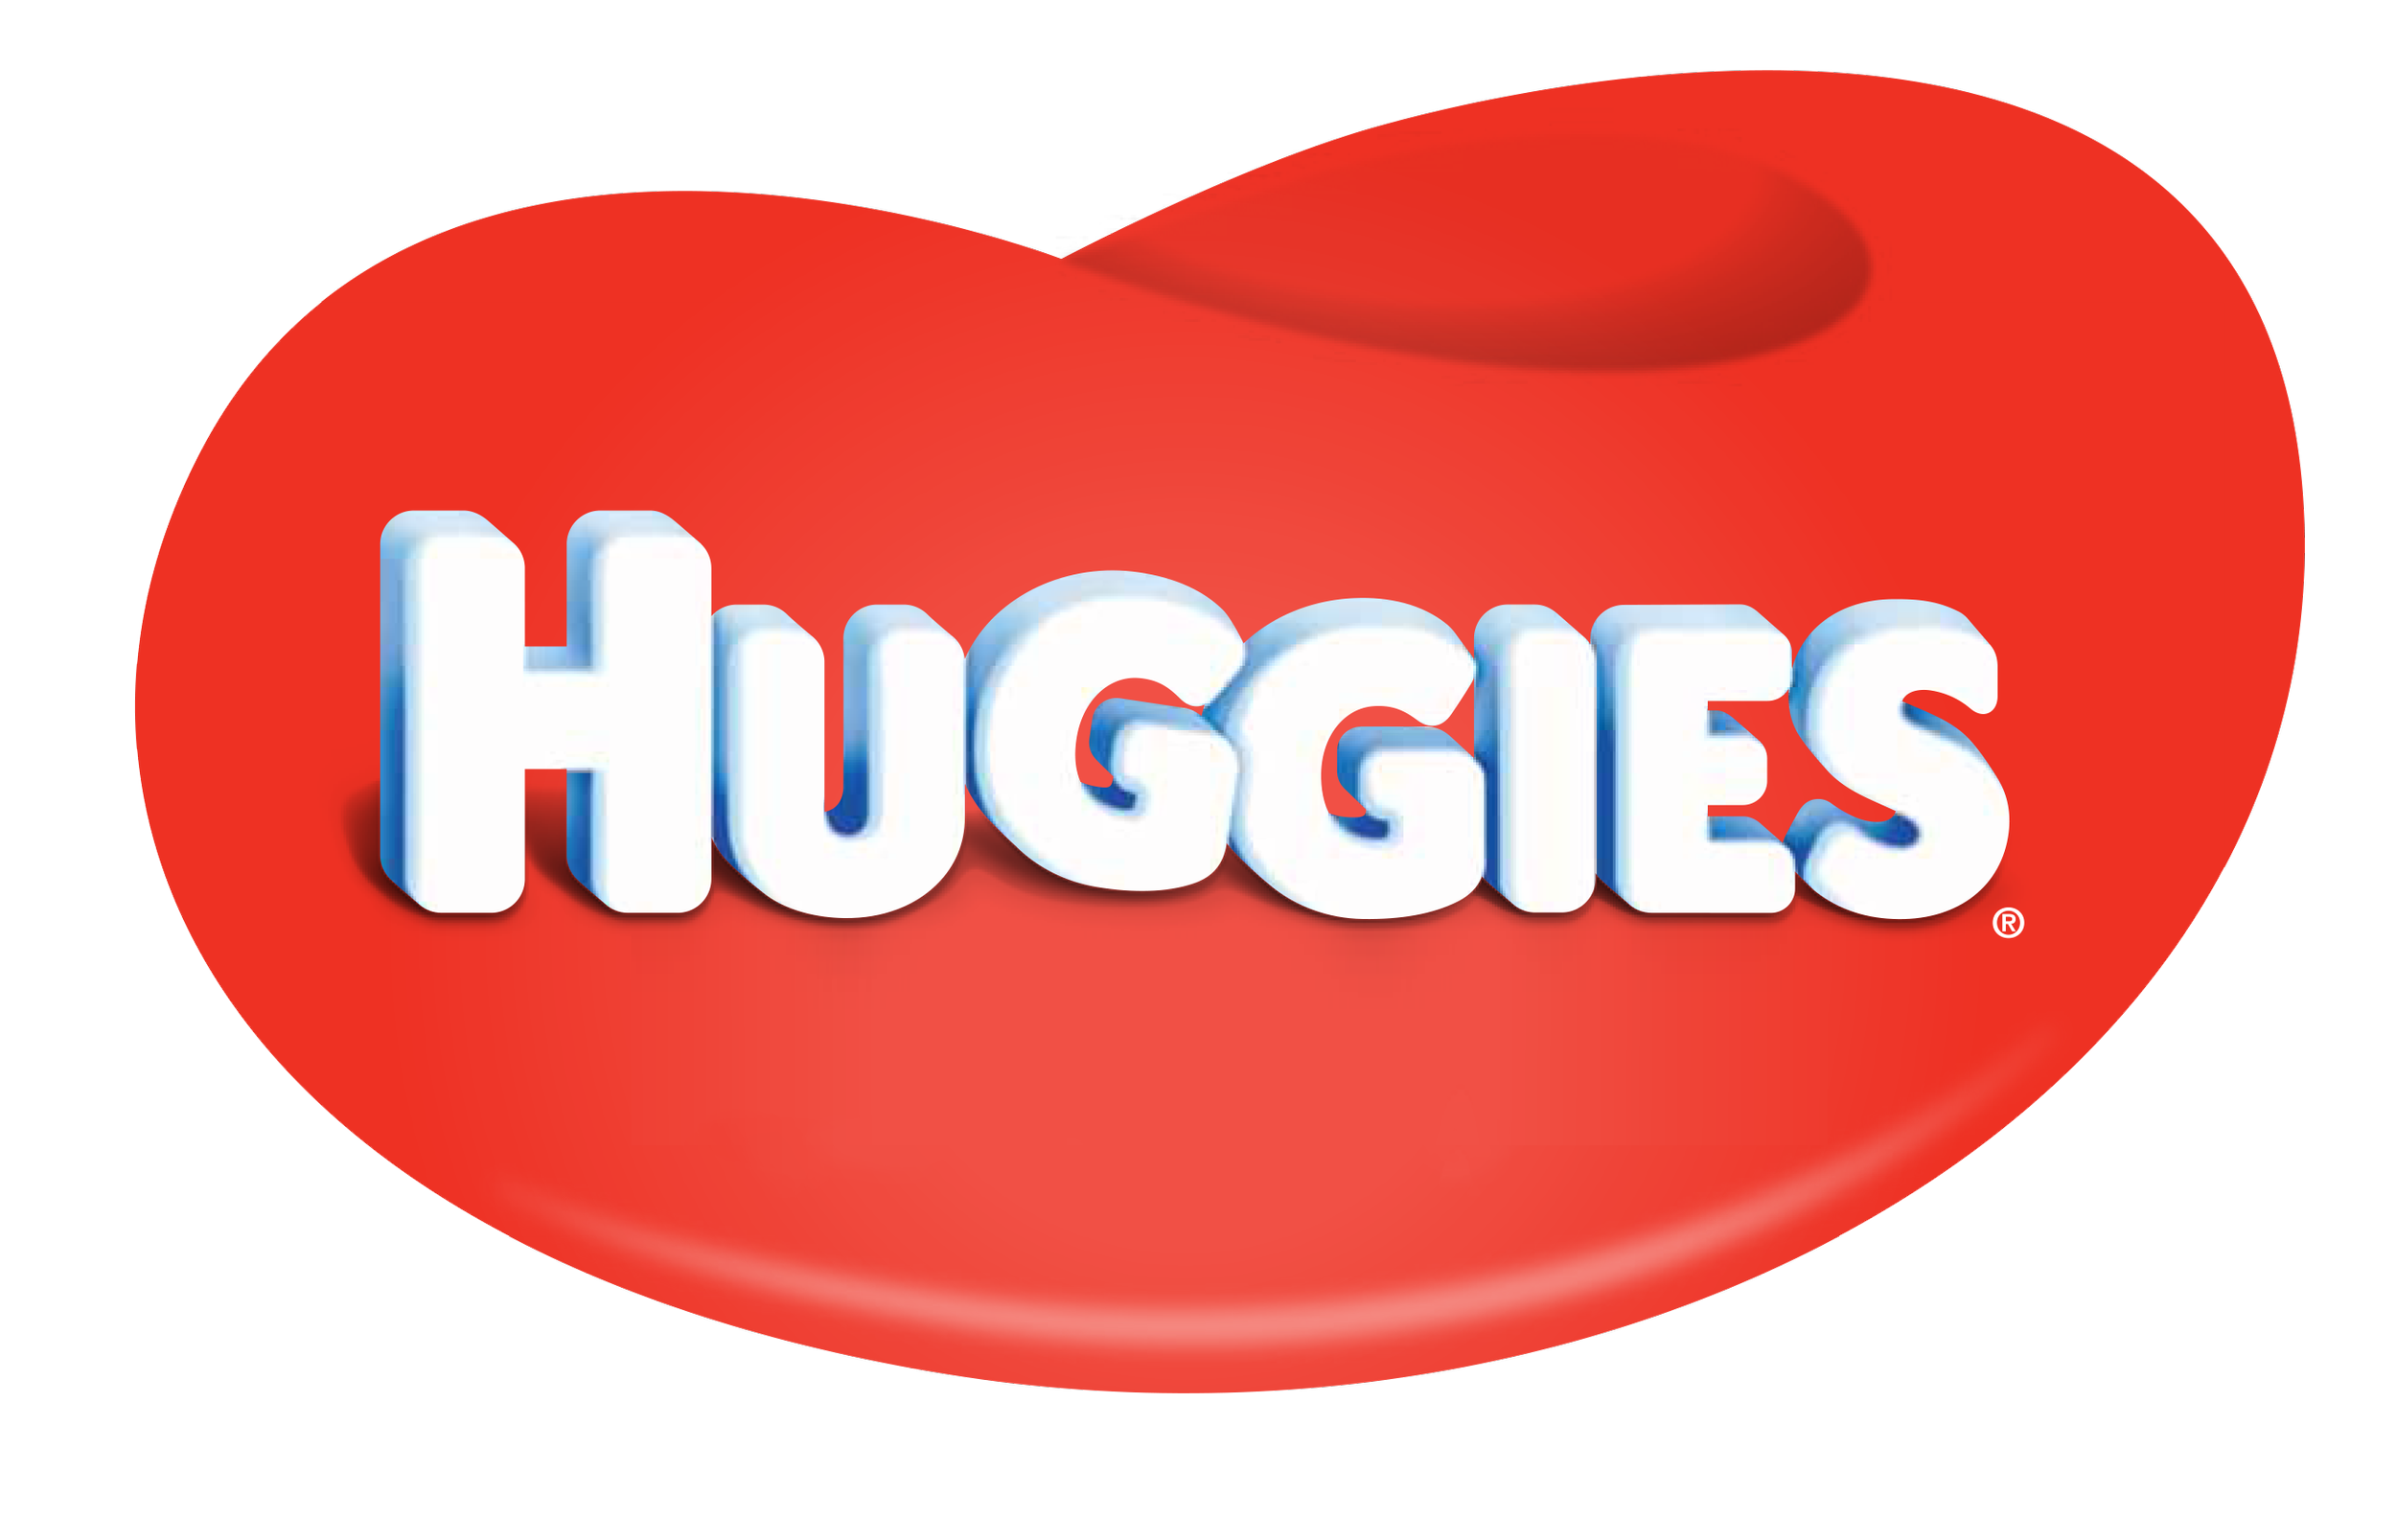 Huggies_RED_BEAN_LOGO_1 without brand or diapers mention (1).png